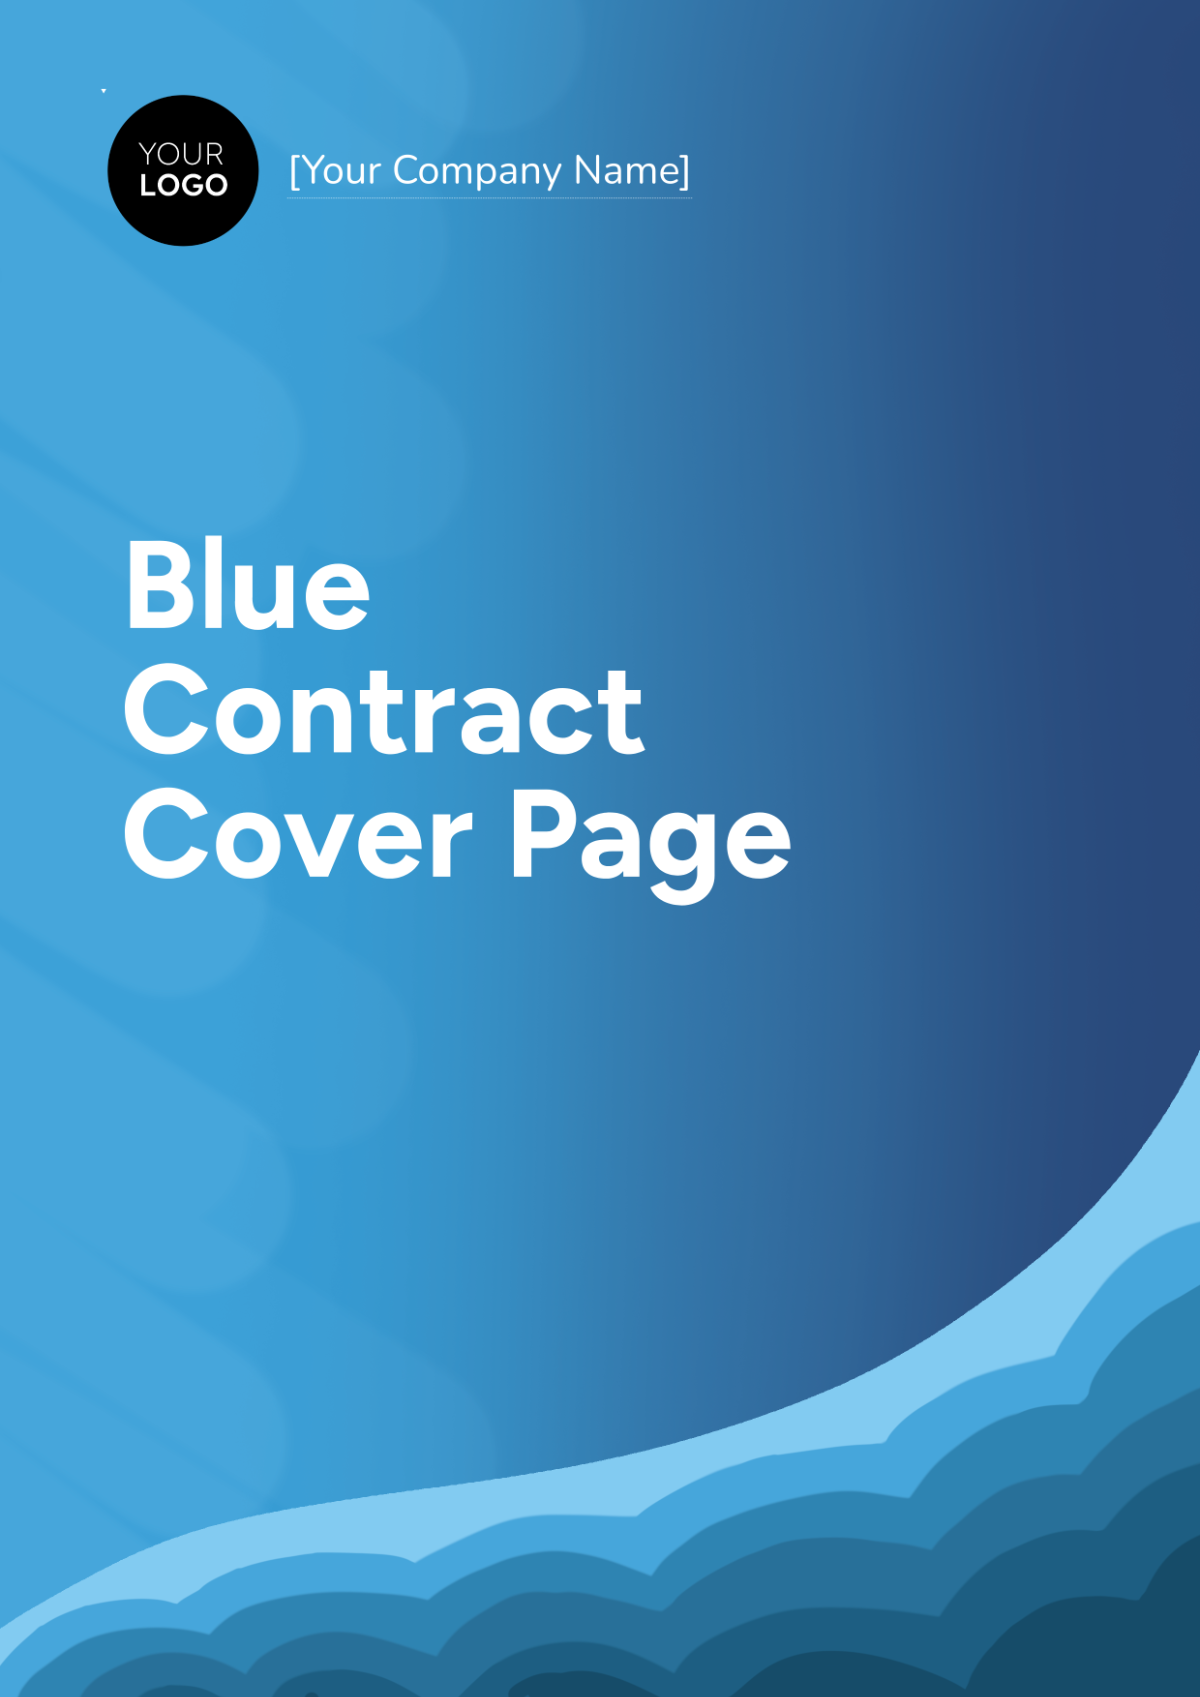 Blue Contract Cover Page Template